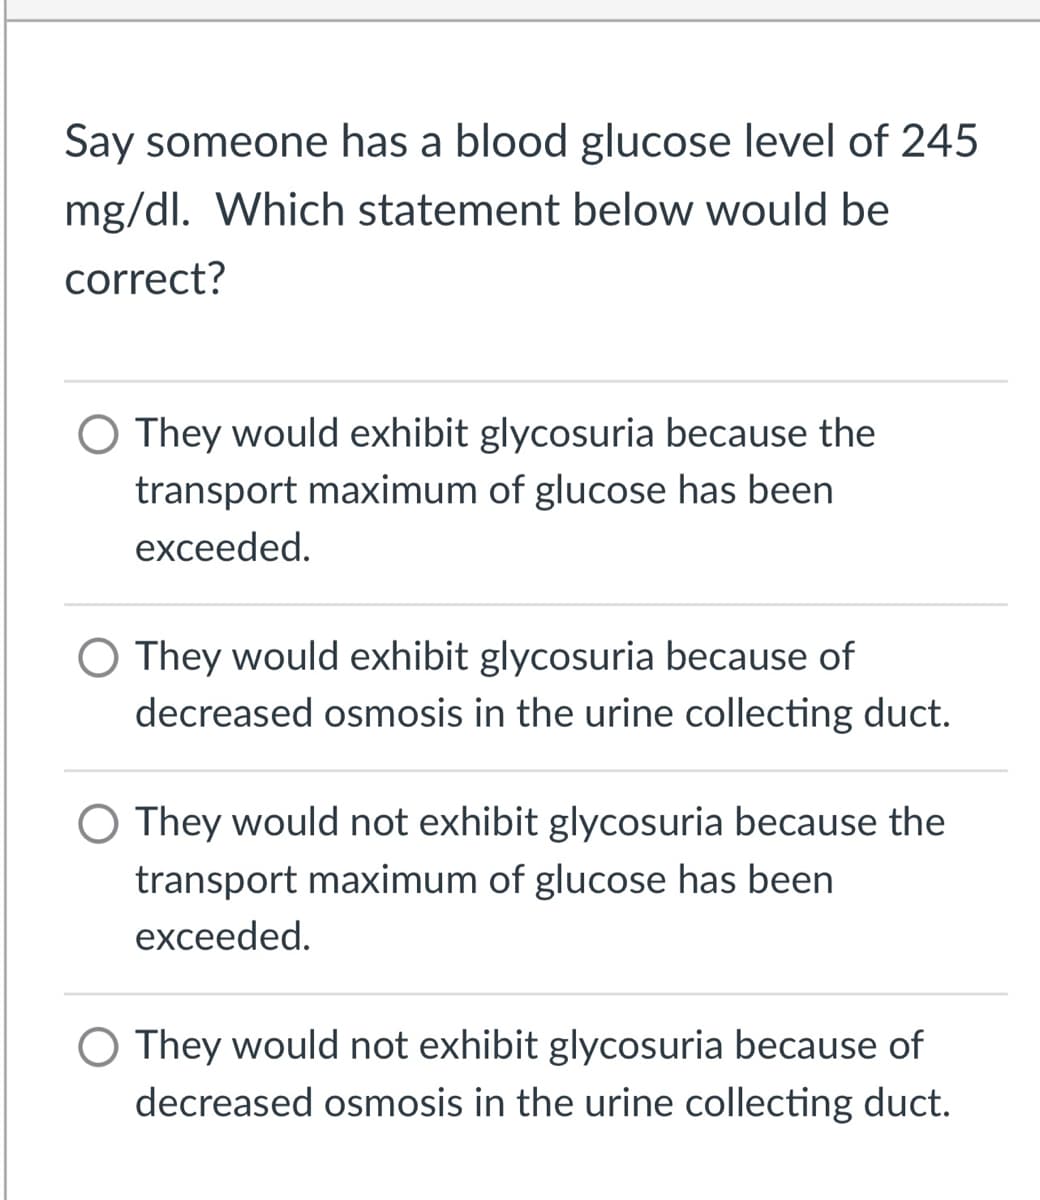 Say someone has a blood glucose level of 245
mg/dl. Which statement below would be
correct?
O They would exhibit glycosuria because the
transport maximum of glucose has been
exceeded.
O They would exhibit glycosuria because of
decreased osmosis in the urine collecting duct.
O They would not exhibit glycosuria because the
transport maximum of glucose has been
exceeded.
O They would not exhibit glycosuria because of
decreased osmosis in the urine collecting duct.
